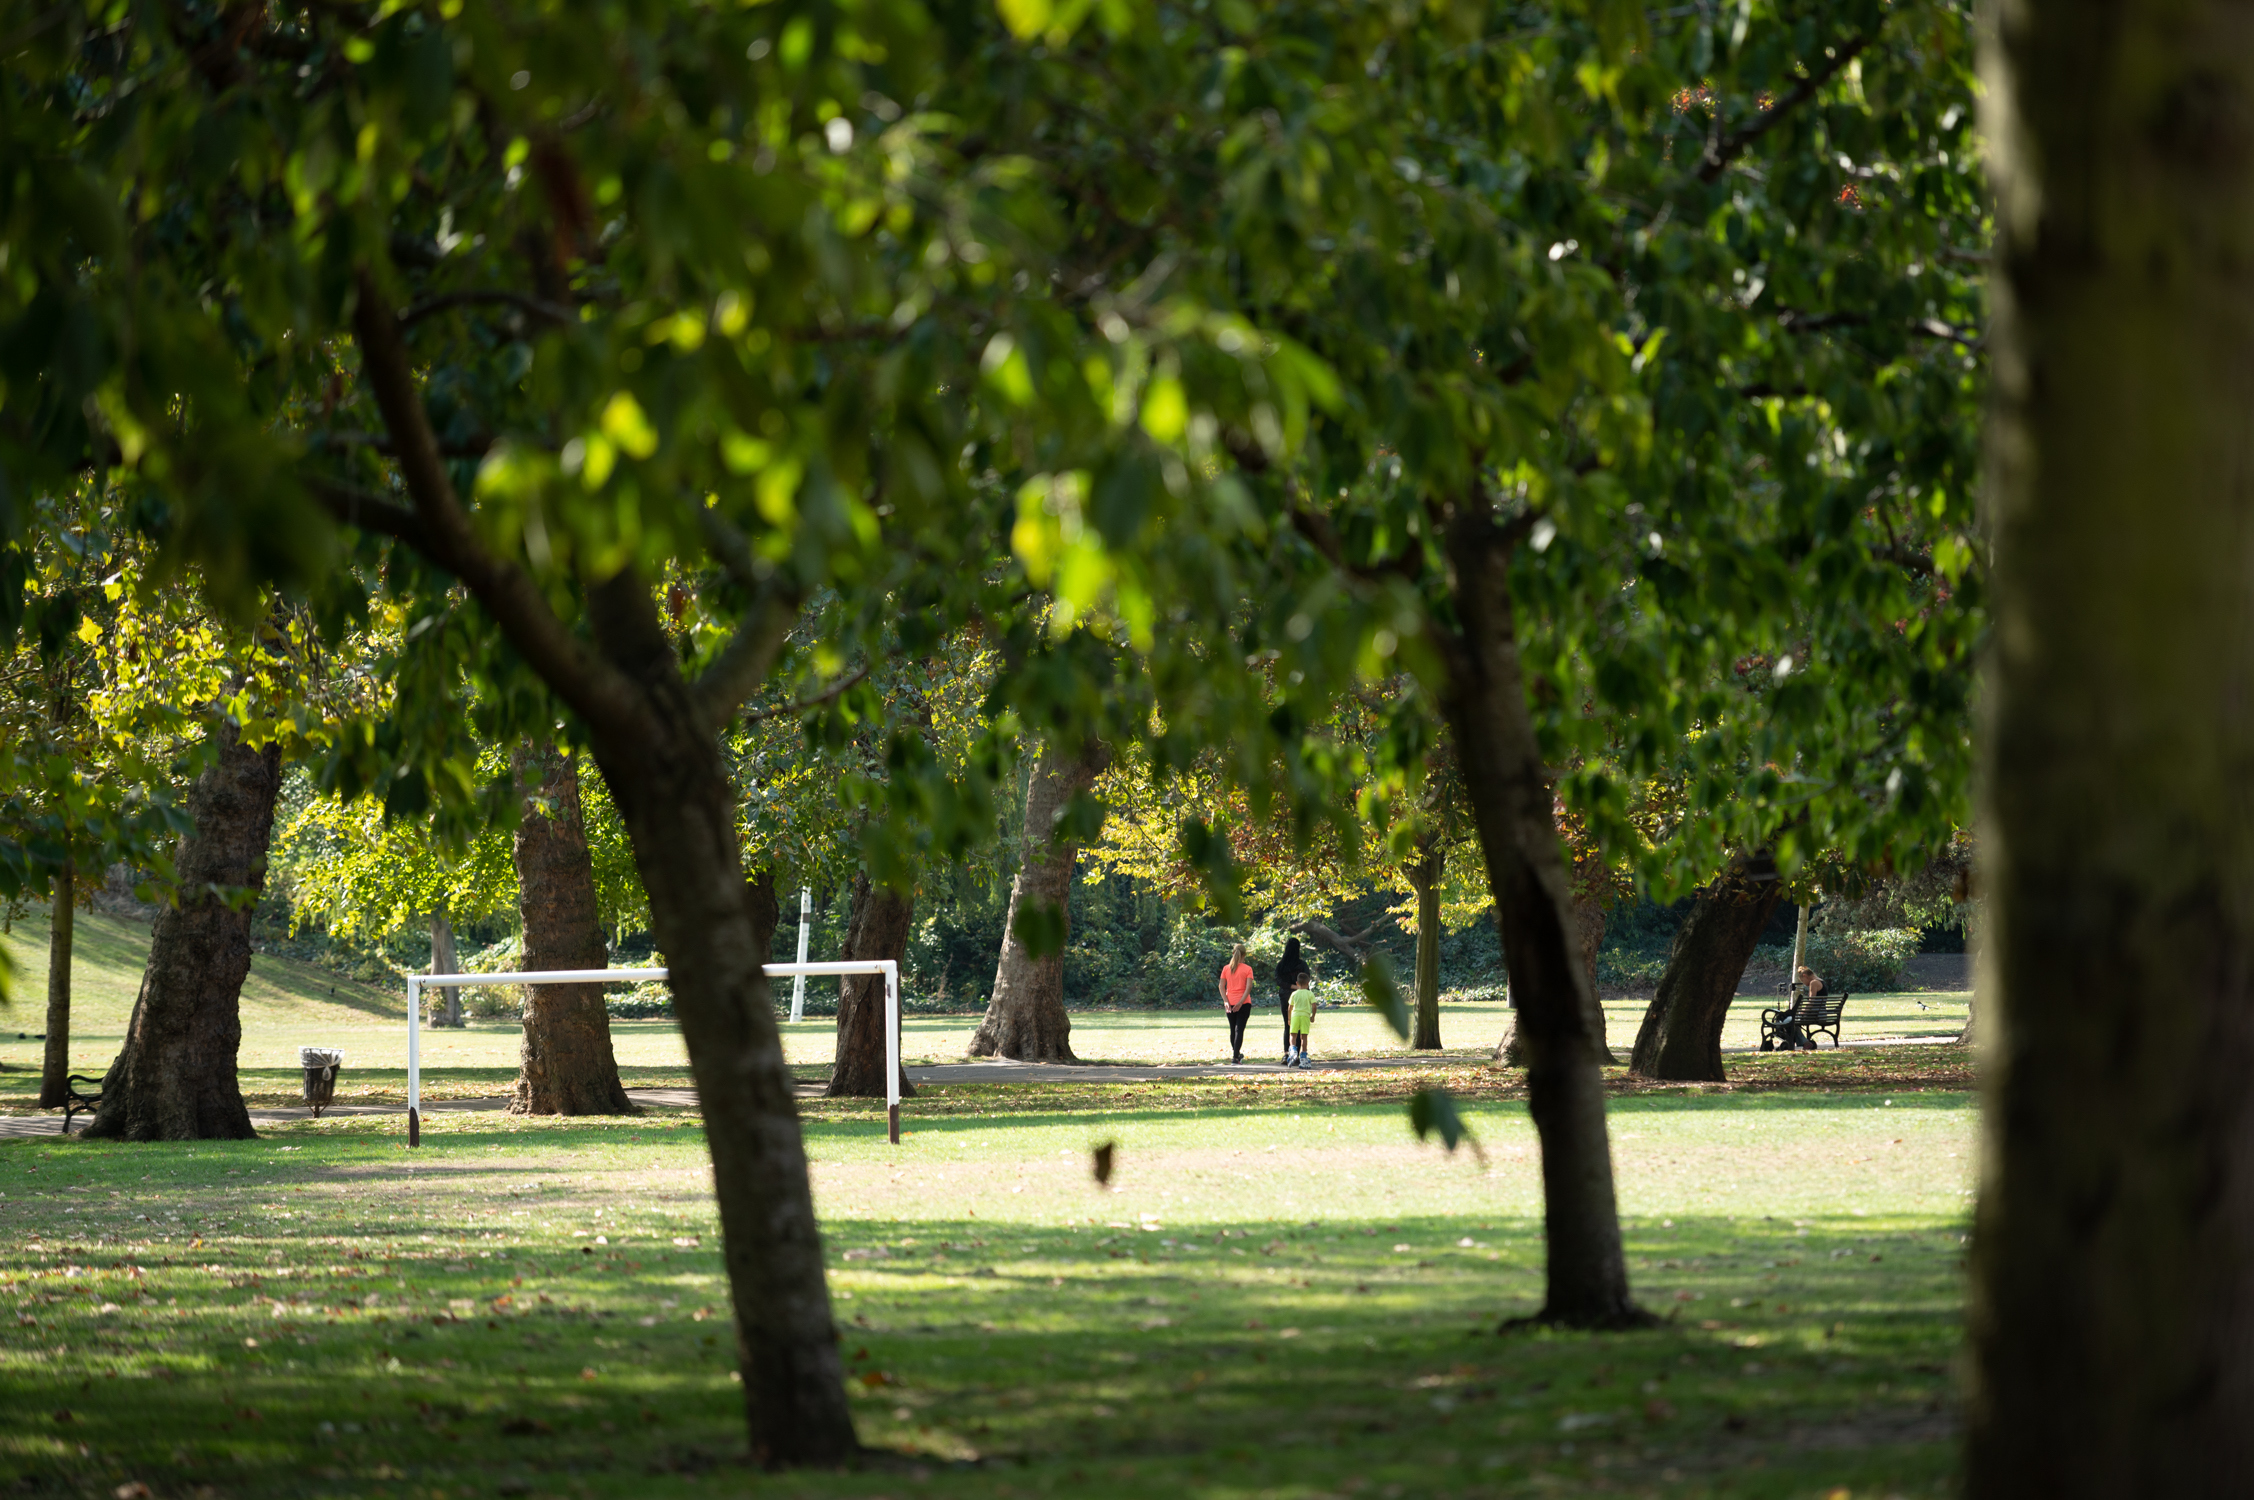 Park scene with trees and football goals